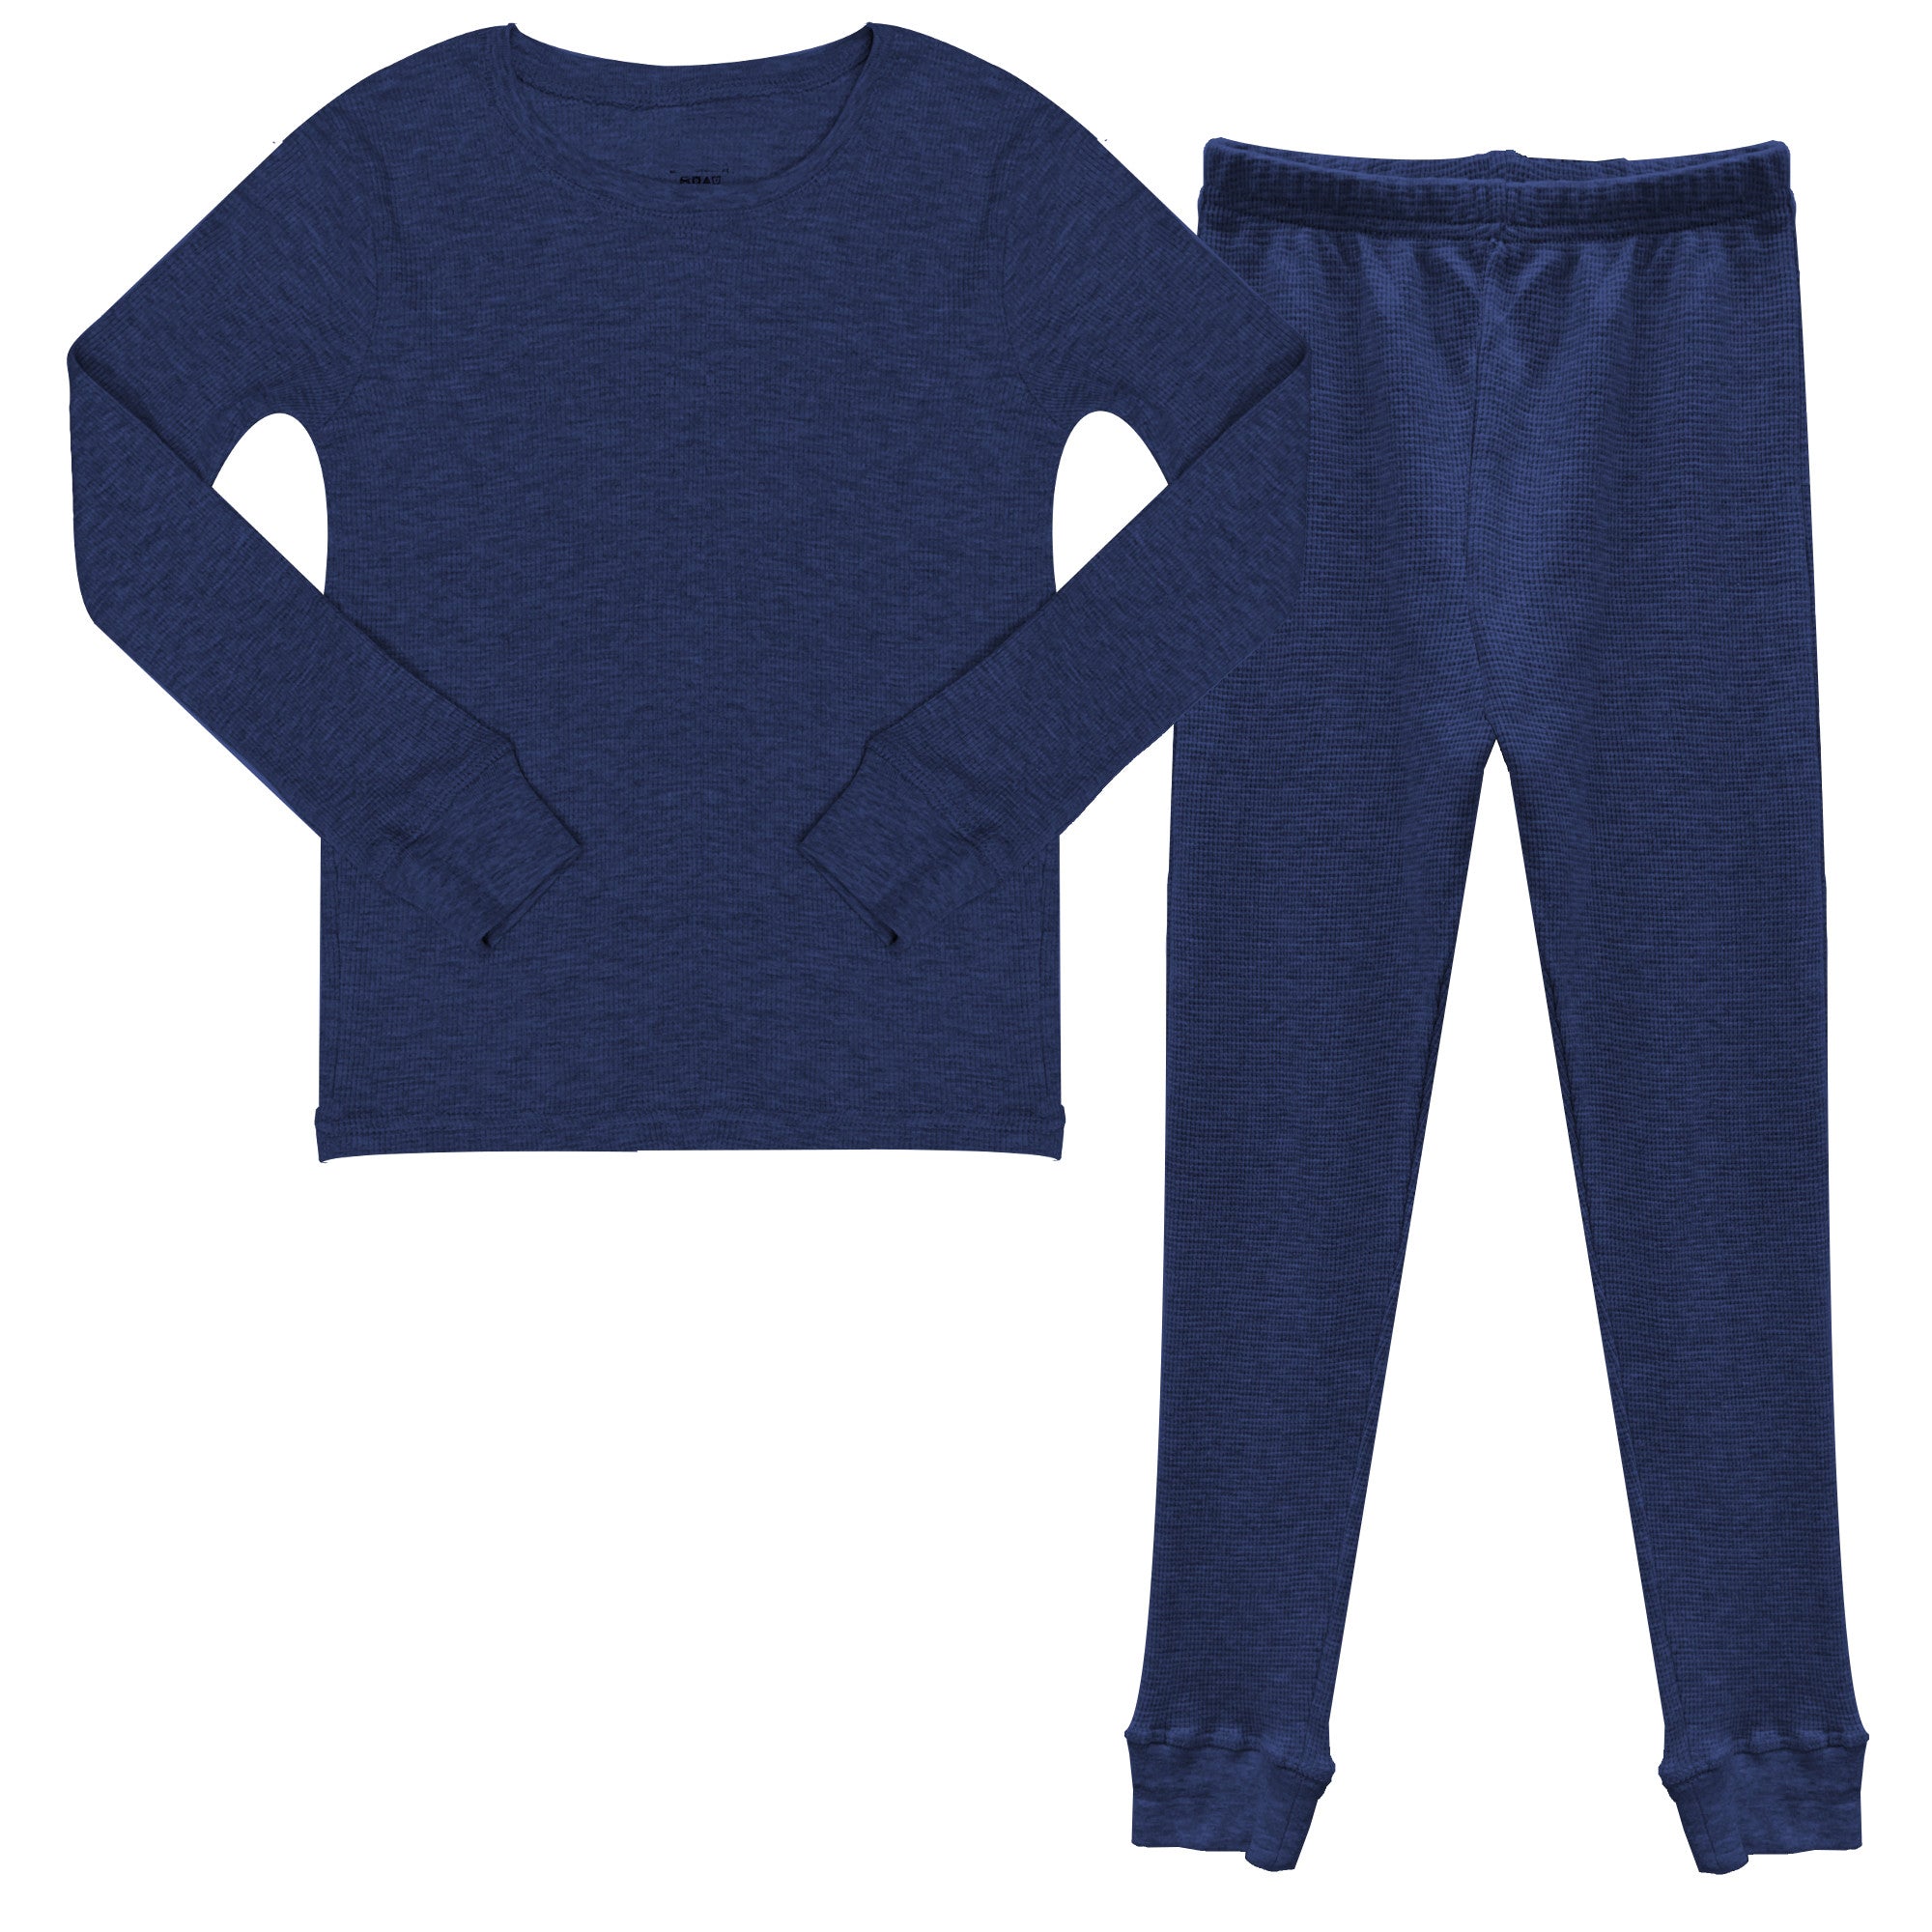  Thermal Underwear for Boys (Thermal Long Johns) Sleeve